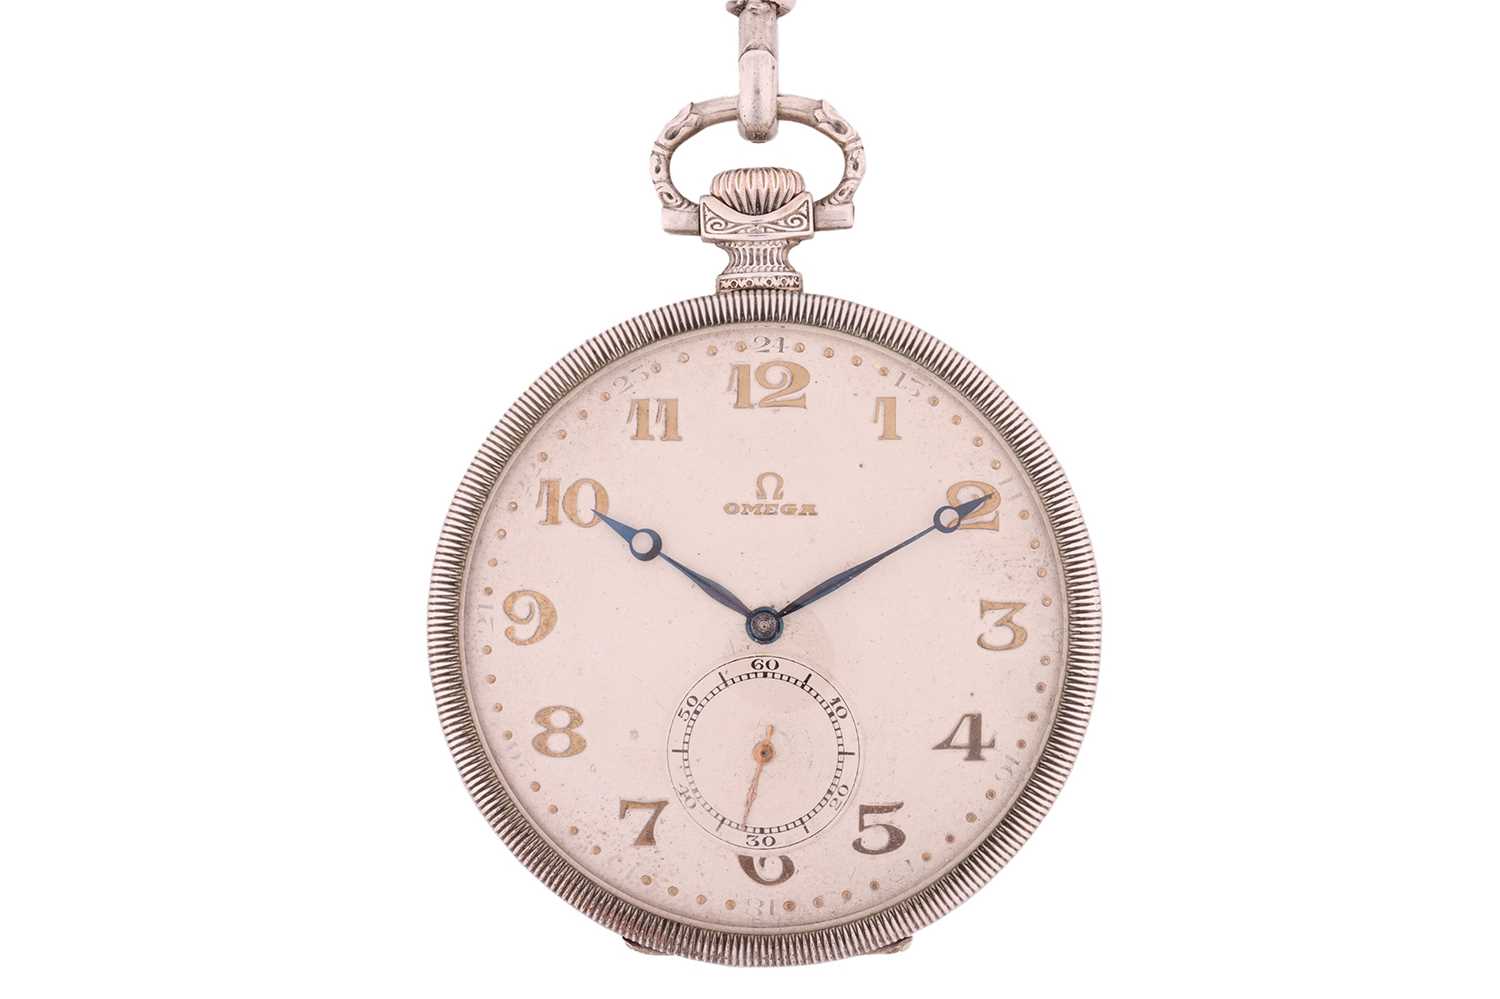 An Omega open-face pocket watch and chain, featuring a keyless wound movement in a silver case measu - Image 2 of 5